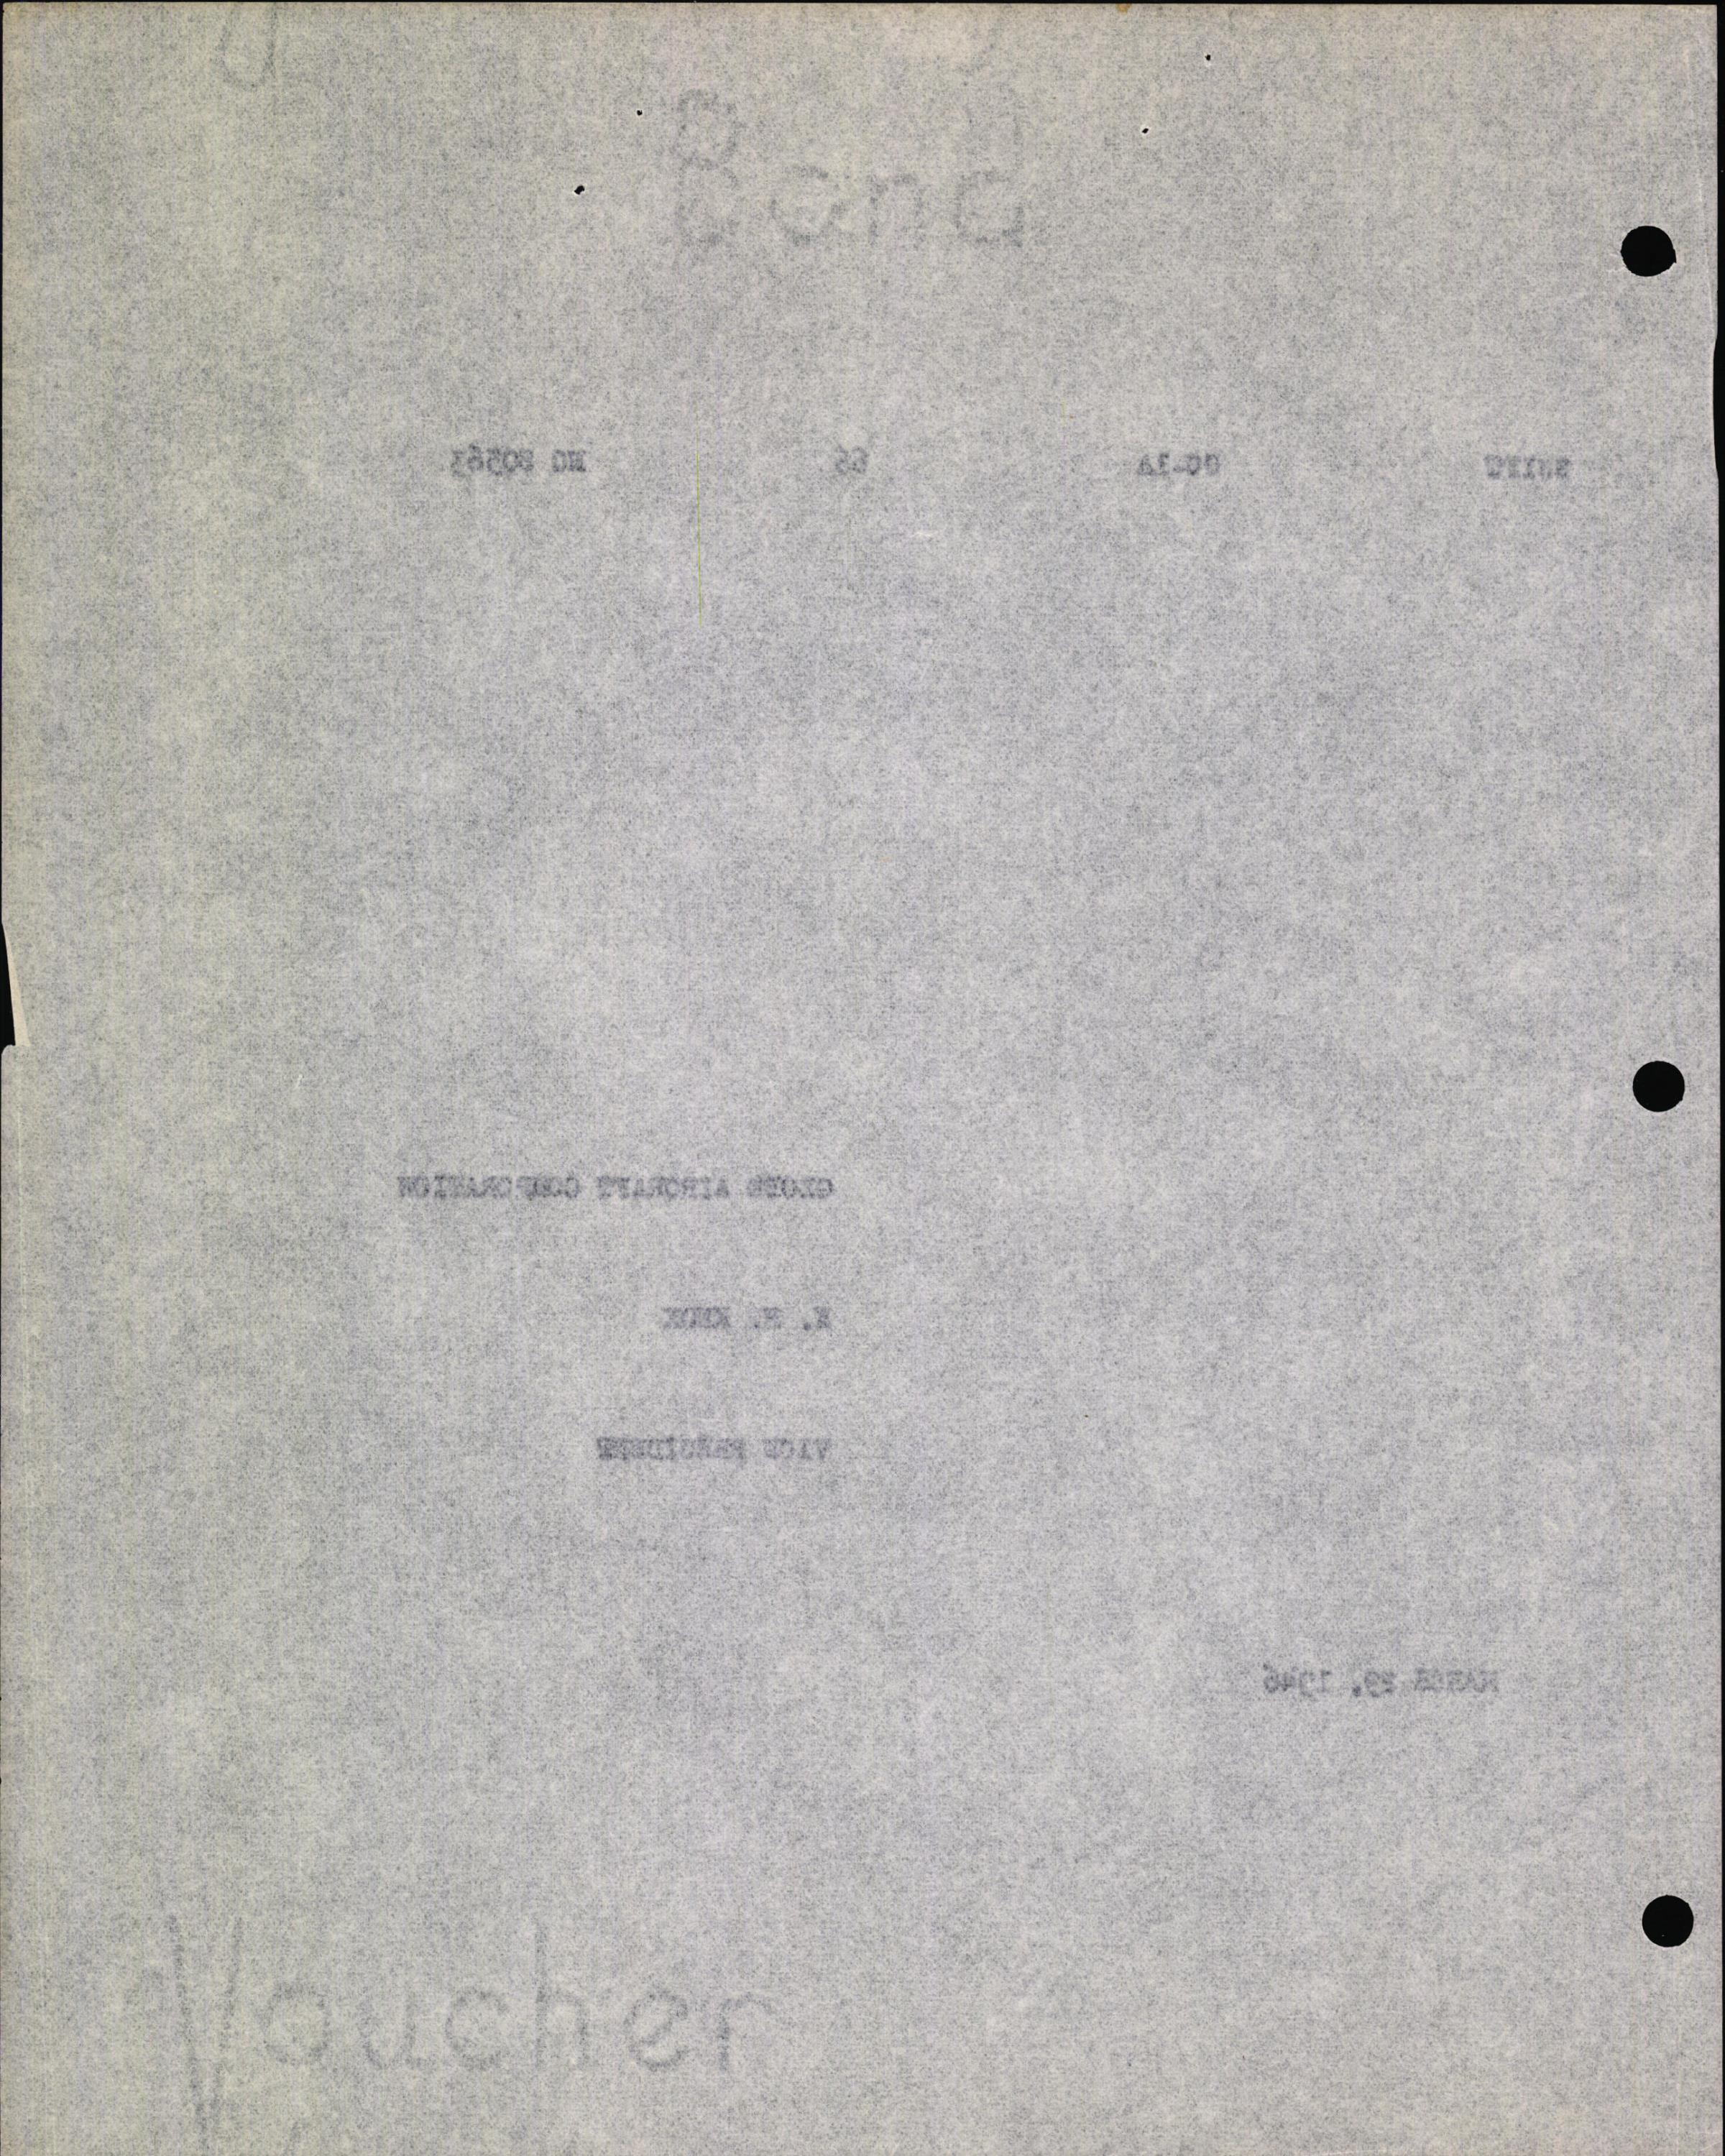 Sample page 6 from AirCorps Library document: Technical Information for Serial Number 66